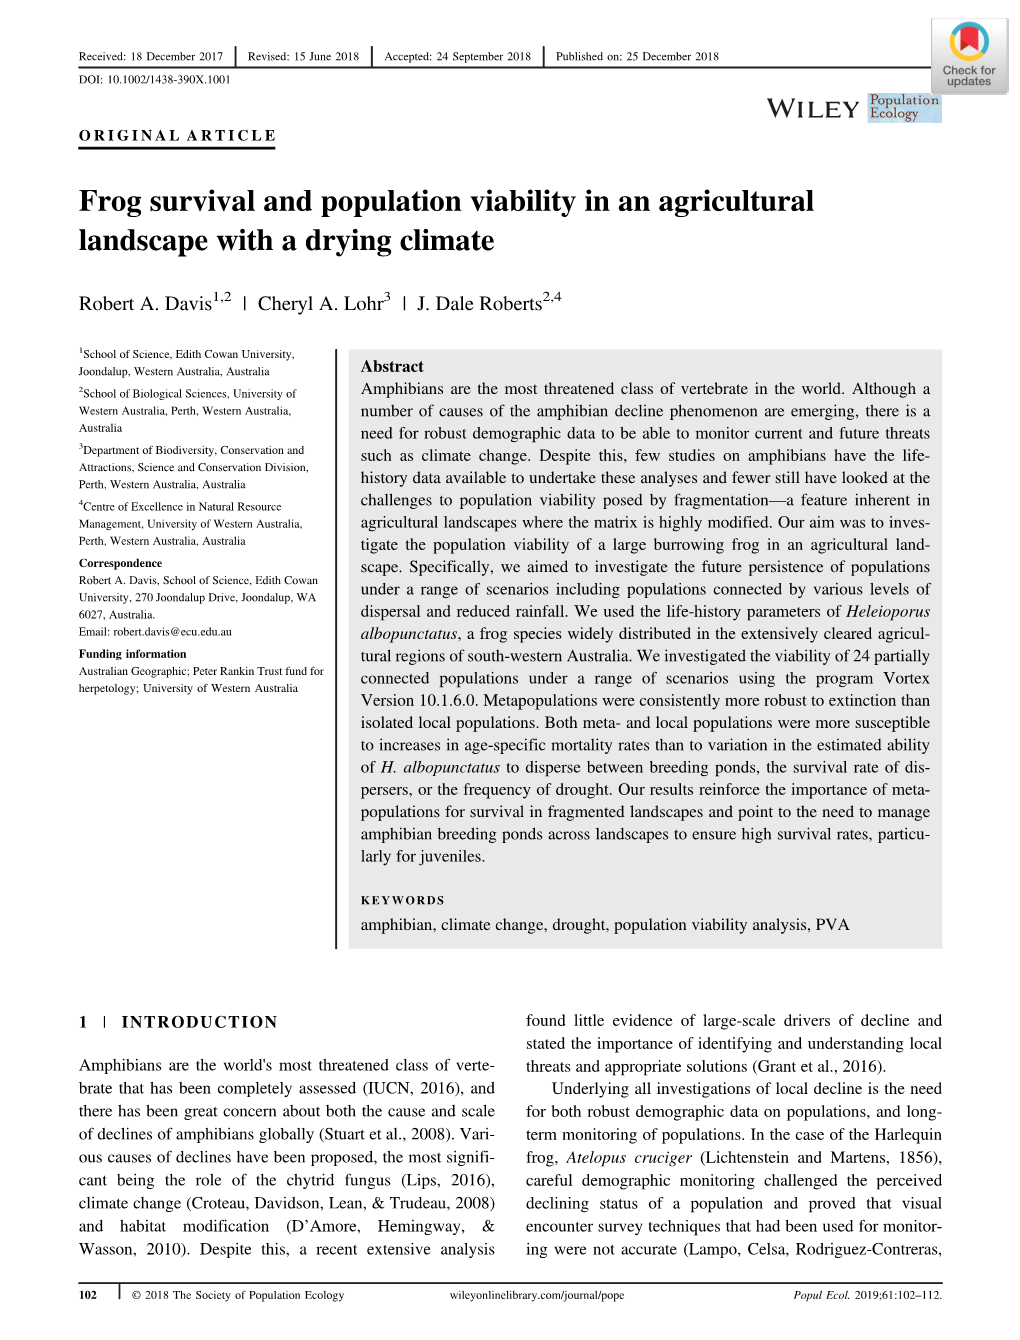 Frog Survival and Population Viability in an Agricultural Landscape with a Drying Climate